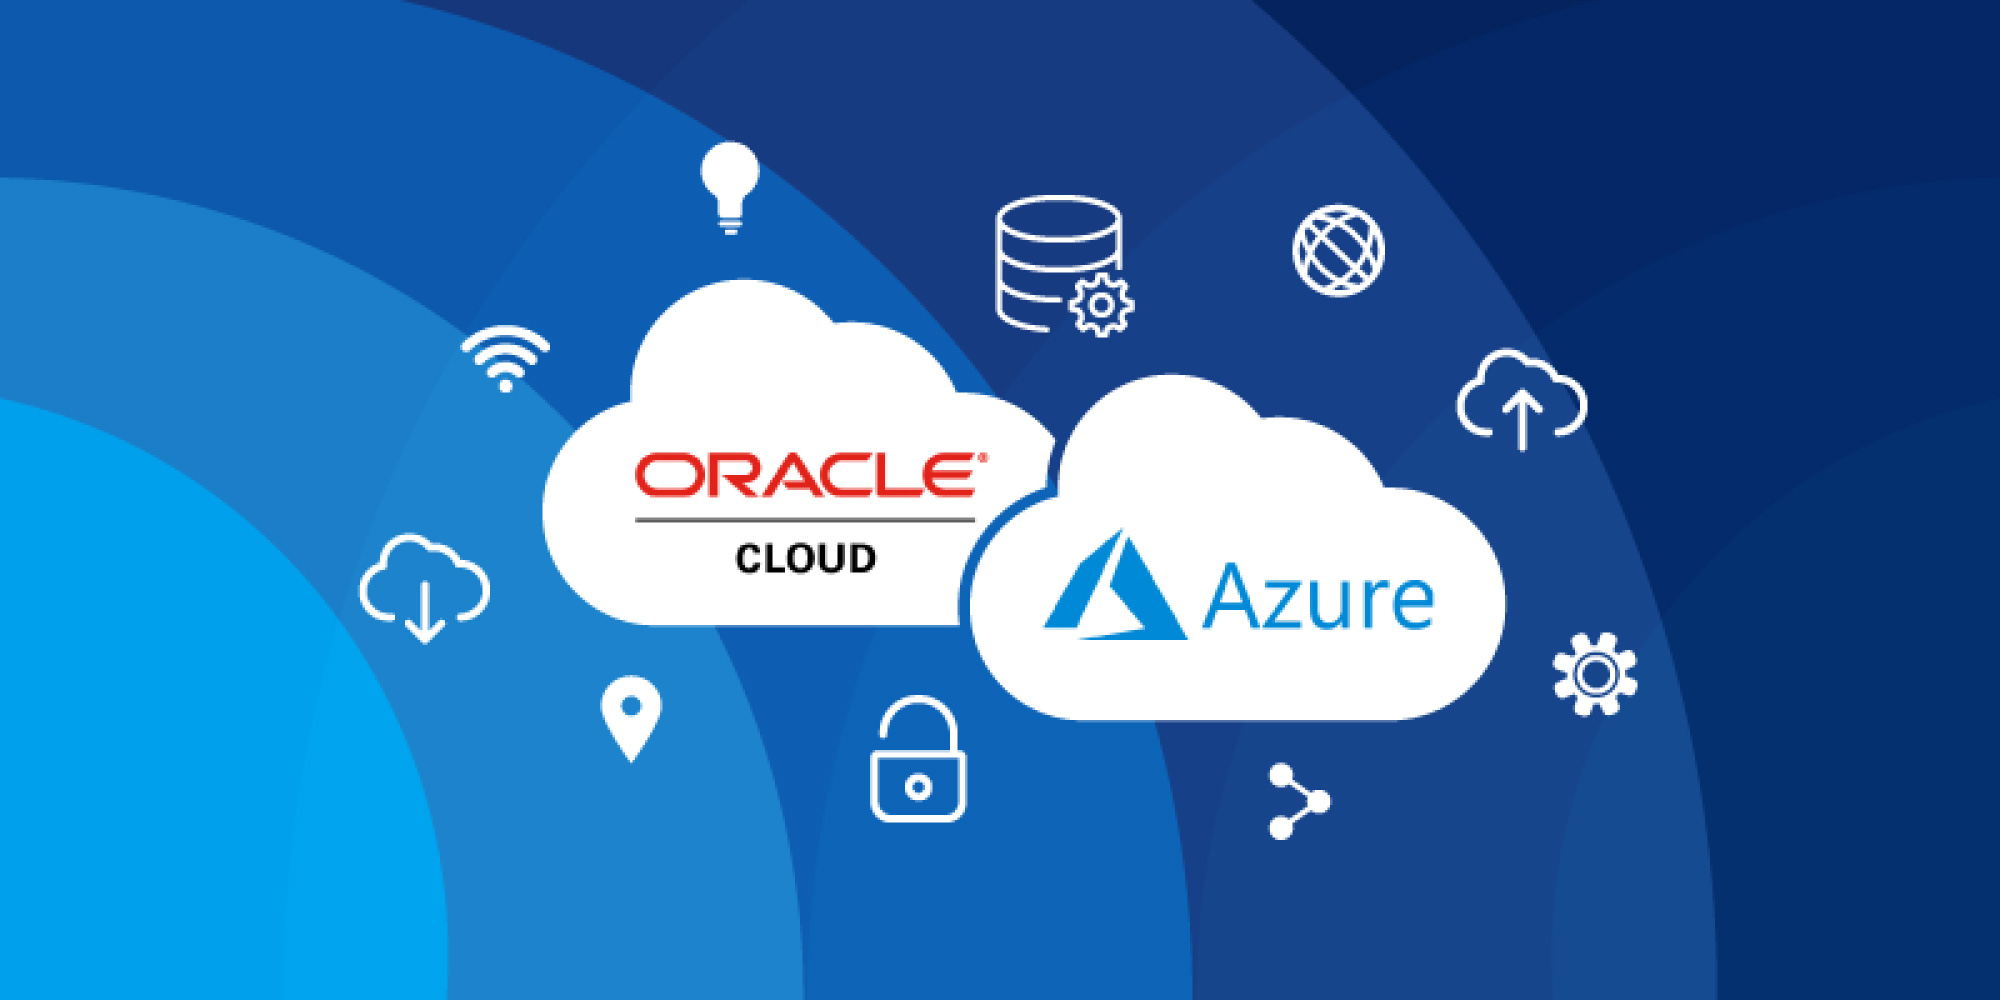 Monitoring customers using both Azure and Oracle Cloud